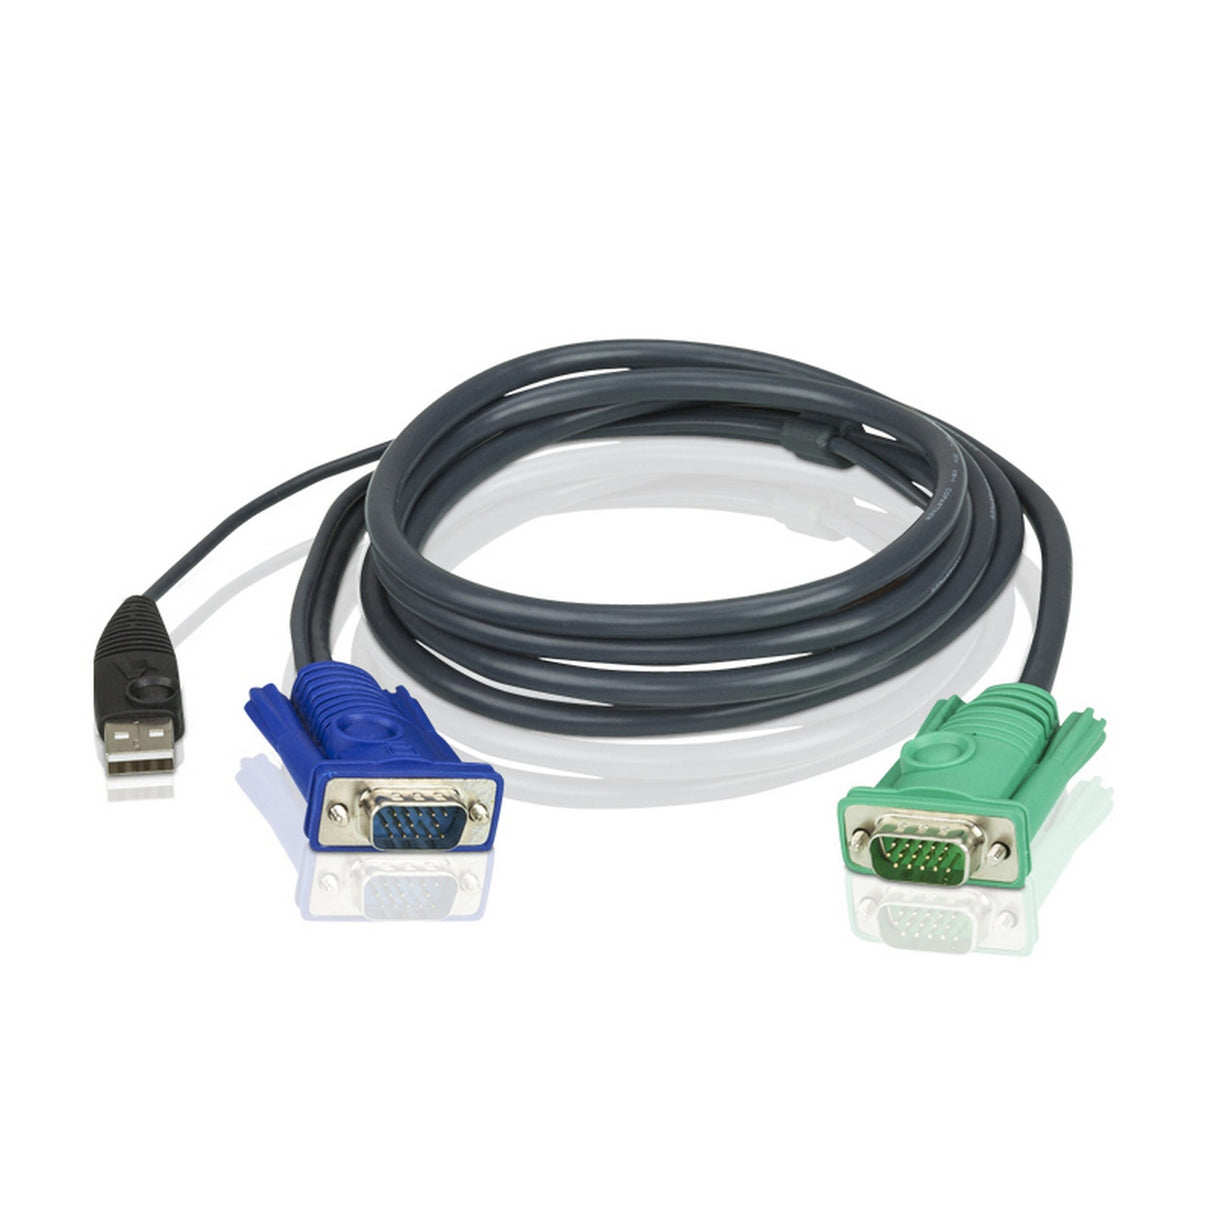 ATEN 2L-5202U 1.8 Meter USB KVM Cable with 3 in 1 SPHD